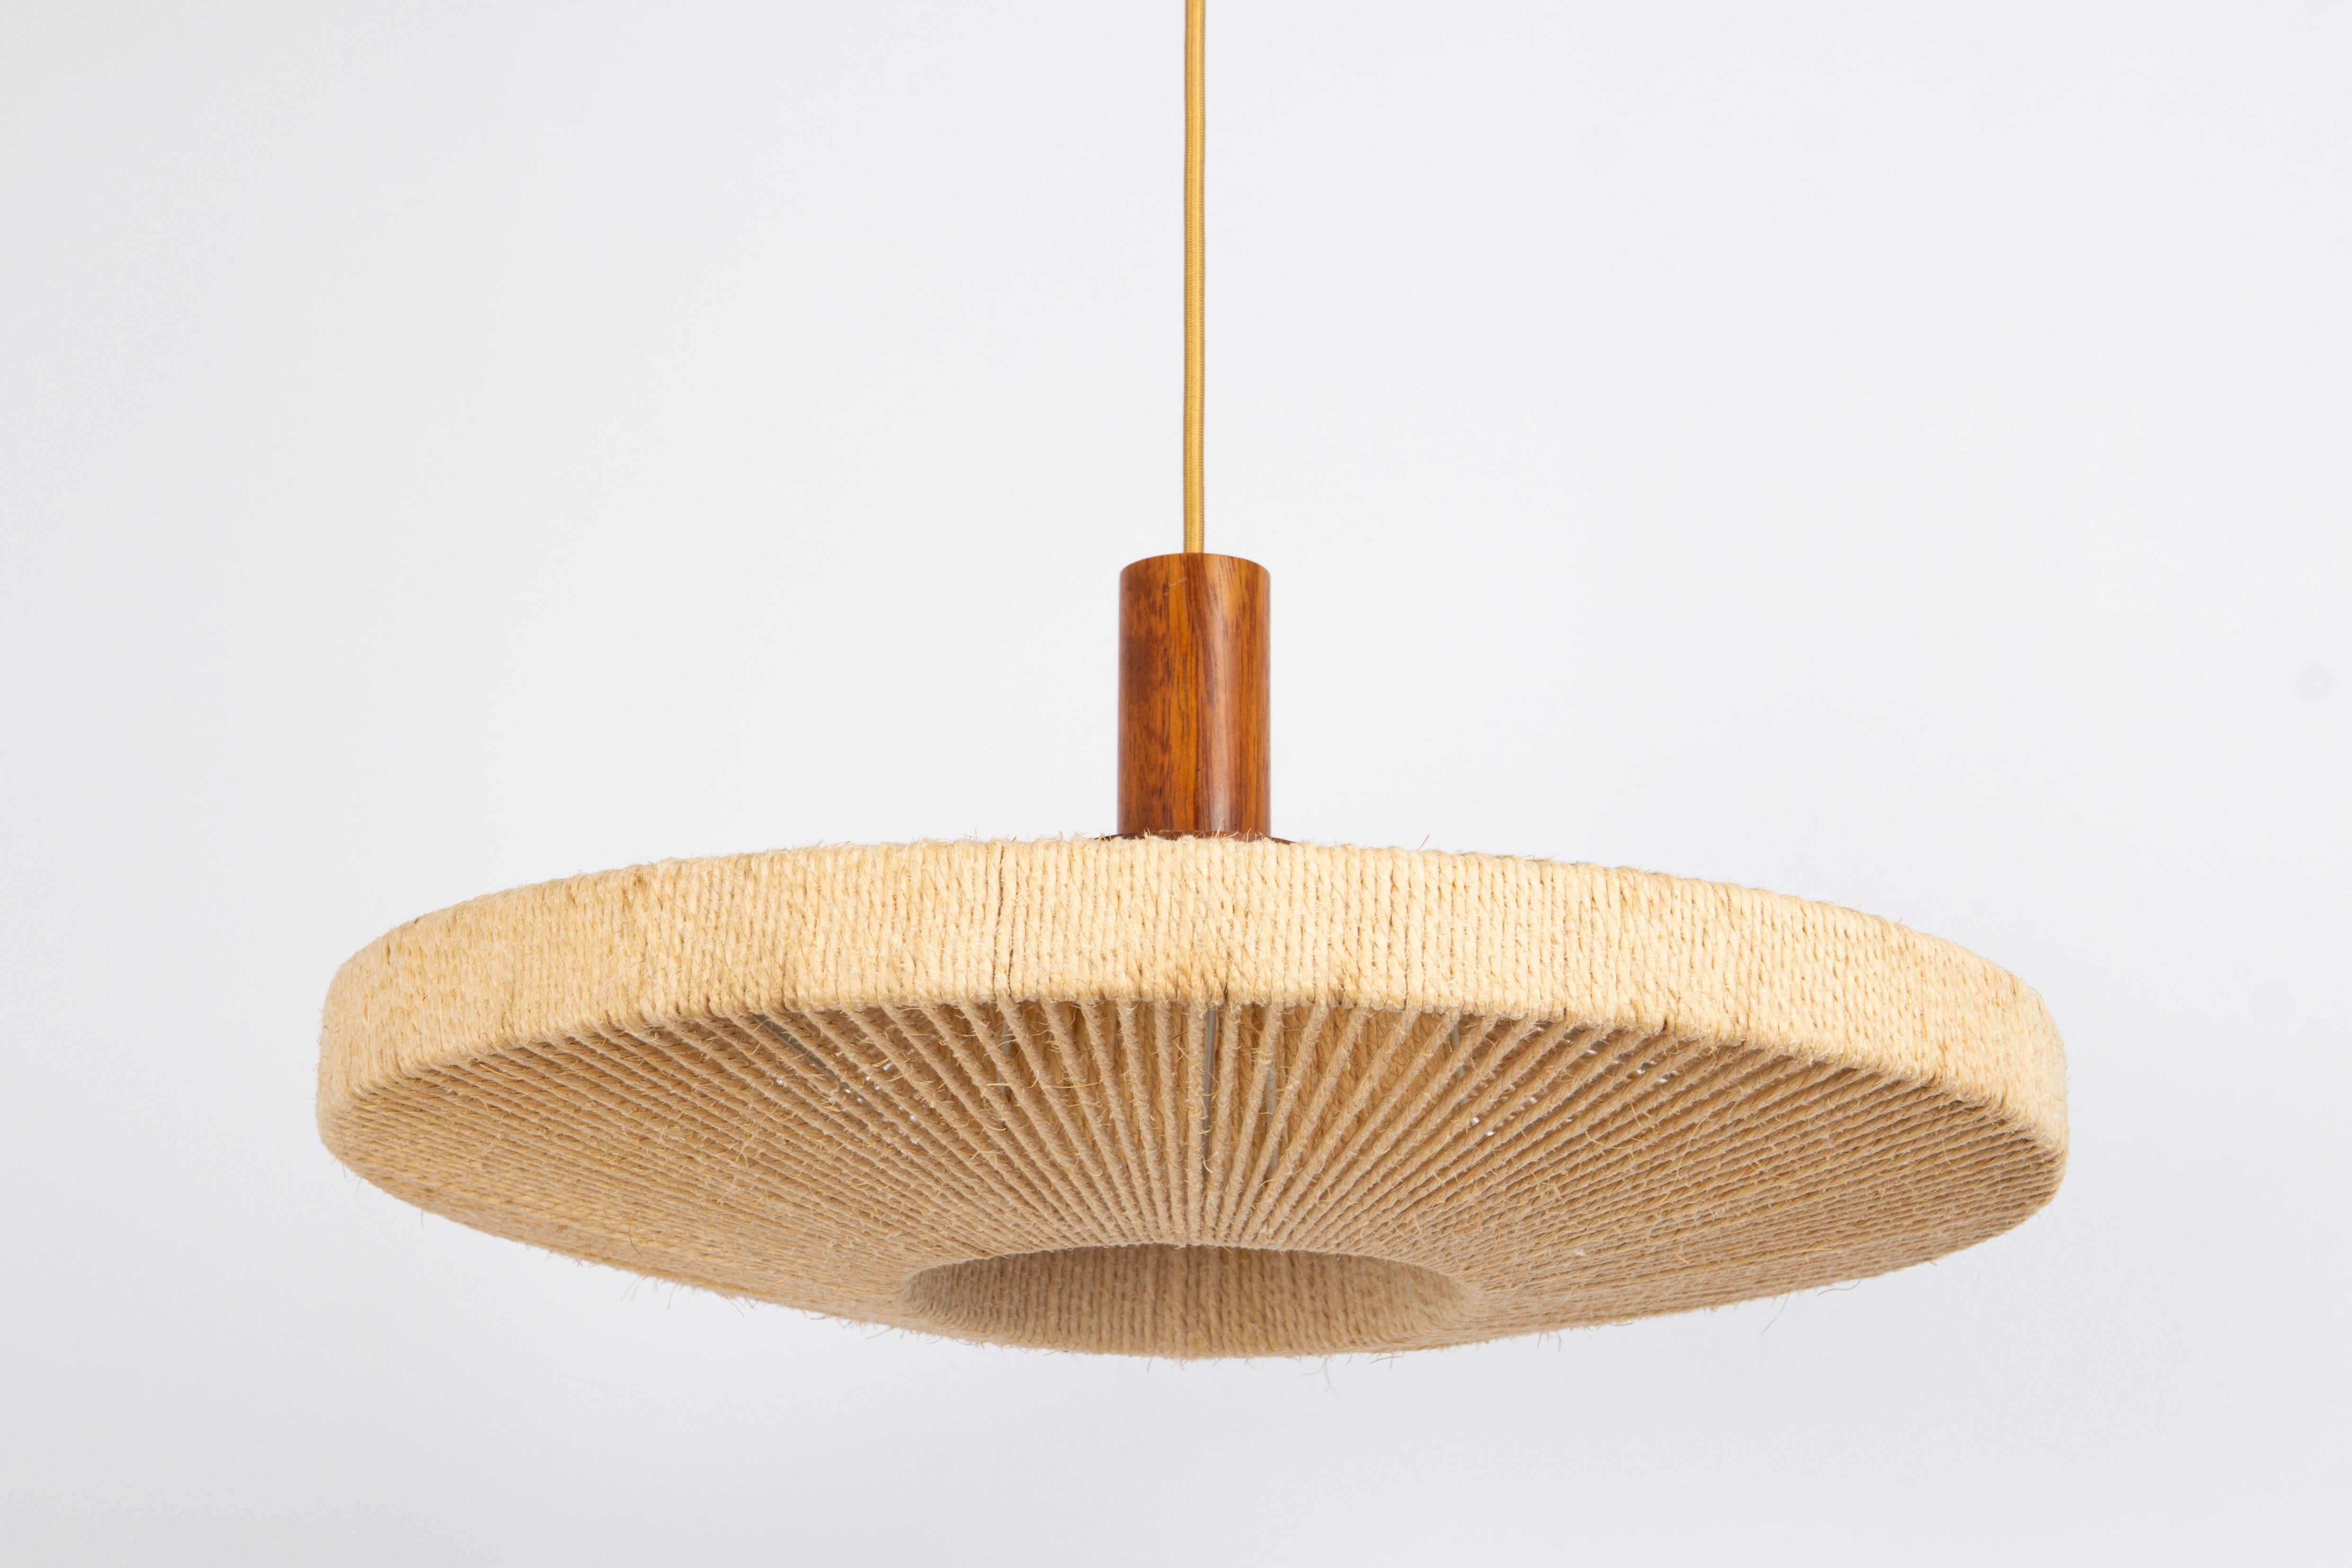 A wonderful midcentury teak chandelier. A unique, timeless and elegant masterpiece of Danish Teak wood designed by Temde Leuchten, Switzerland, 1960s. Danish modern Pendant lamp in solid teak with shade woven with jute/hemp cords/string. Gives off a